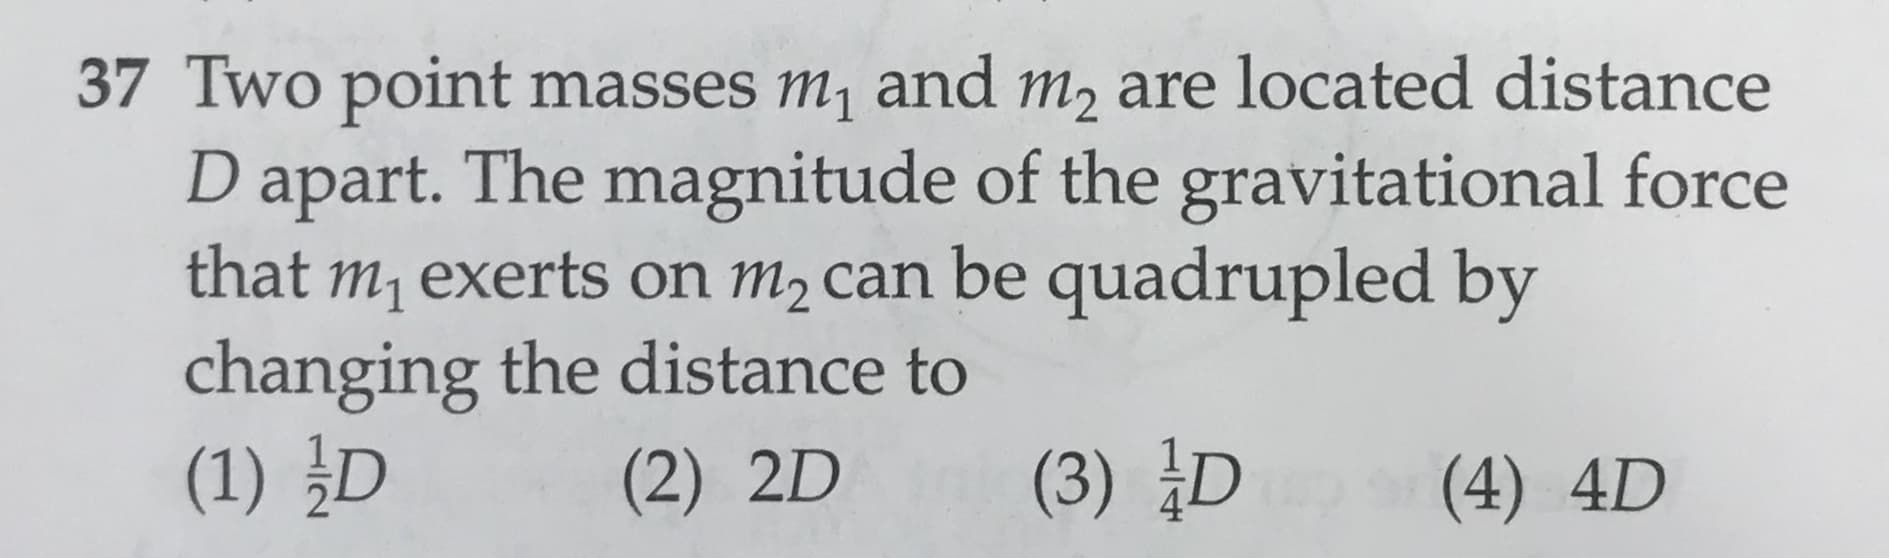 37 Two point masses m1 and m2 are located distance
D apart. The magnitude of the gravitational force
that m1 exerts on m2 can be quadrupled by
changing the distance to
(1) D
(3) D
(2) 2D
(4) 4D
